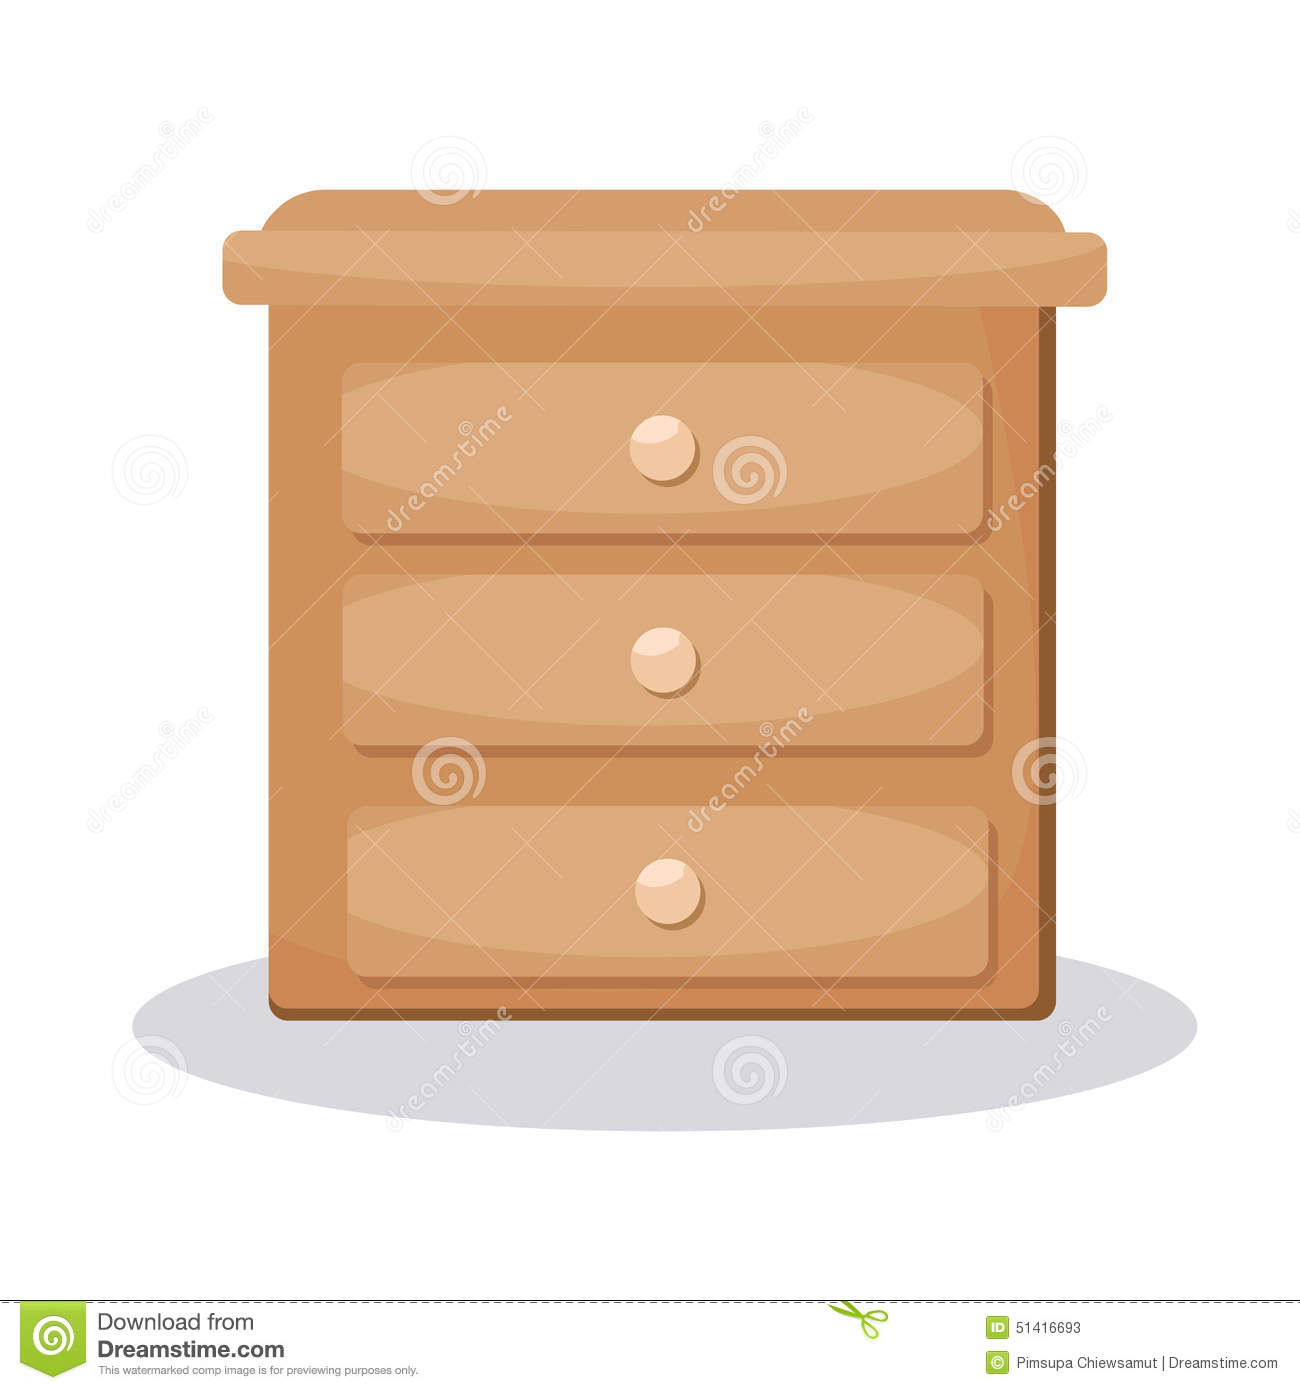 Cabinet Stock Vector   Image  51416693